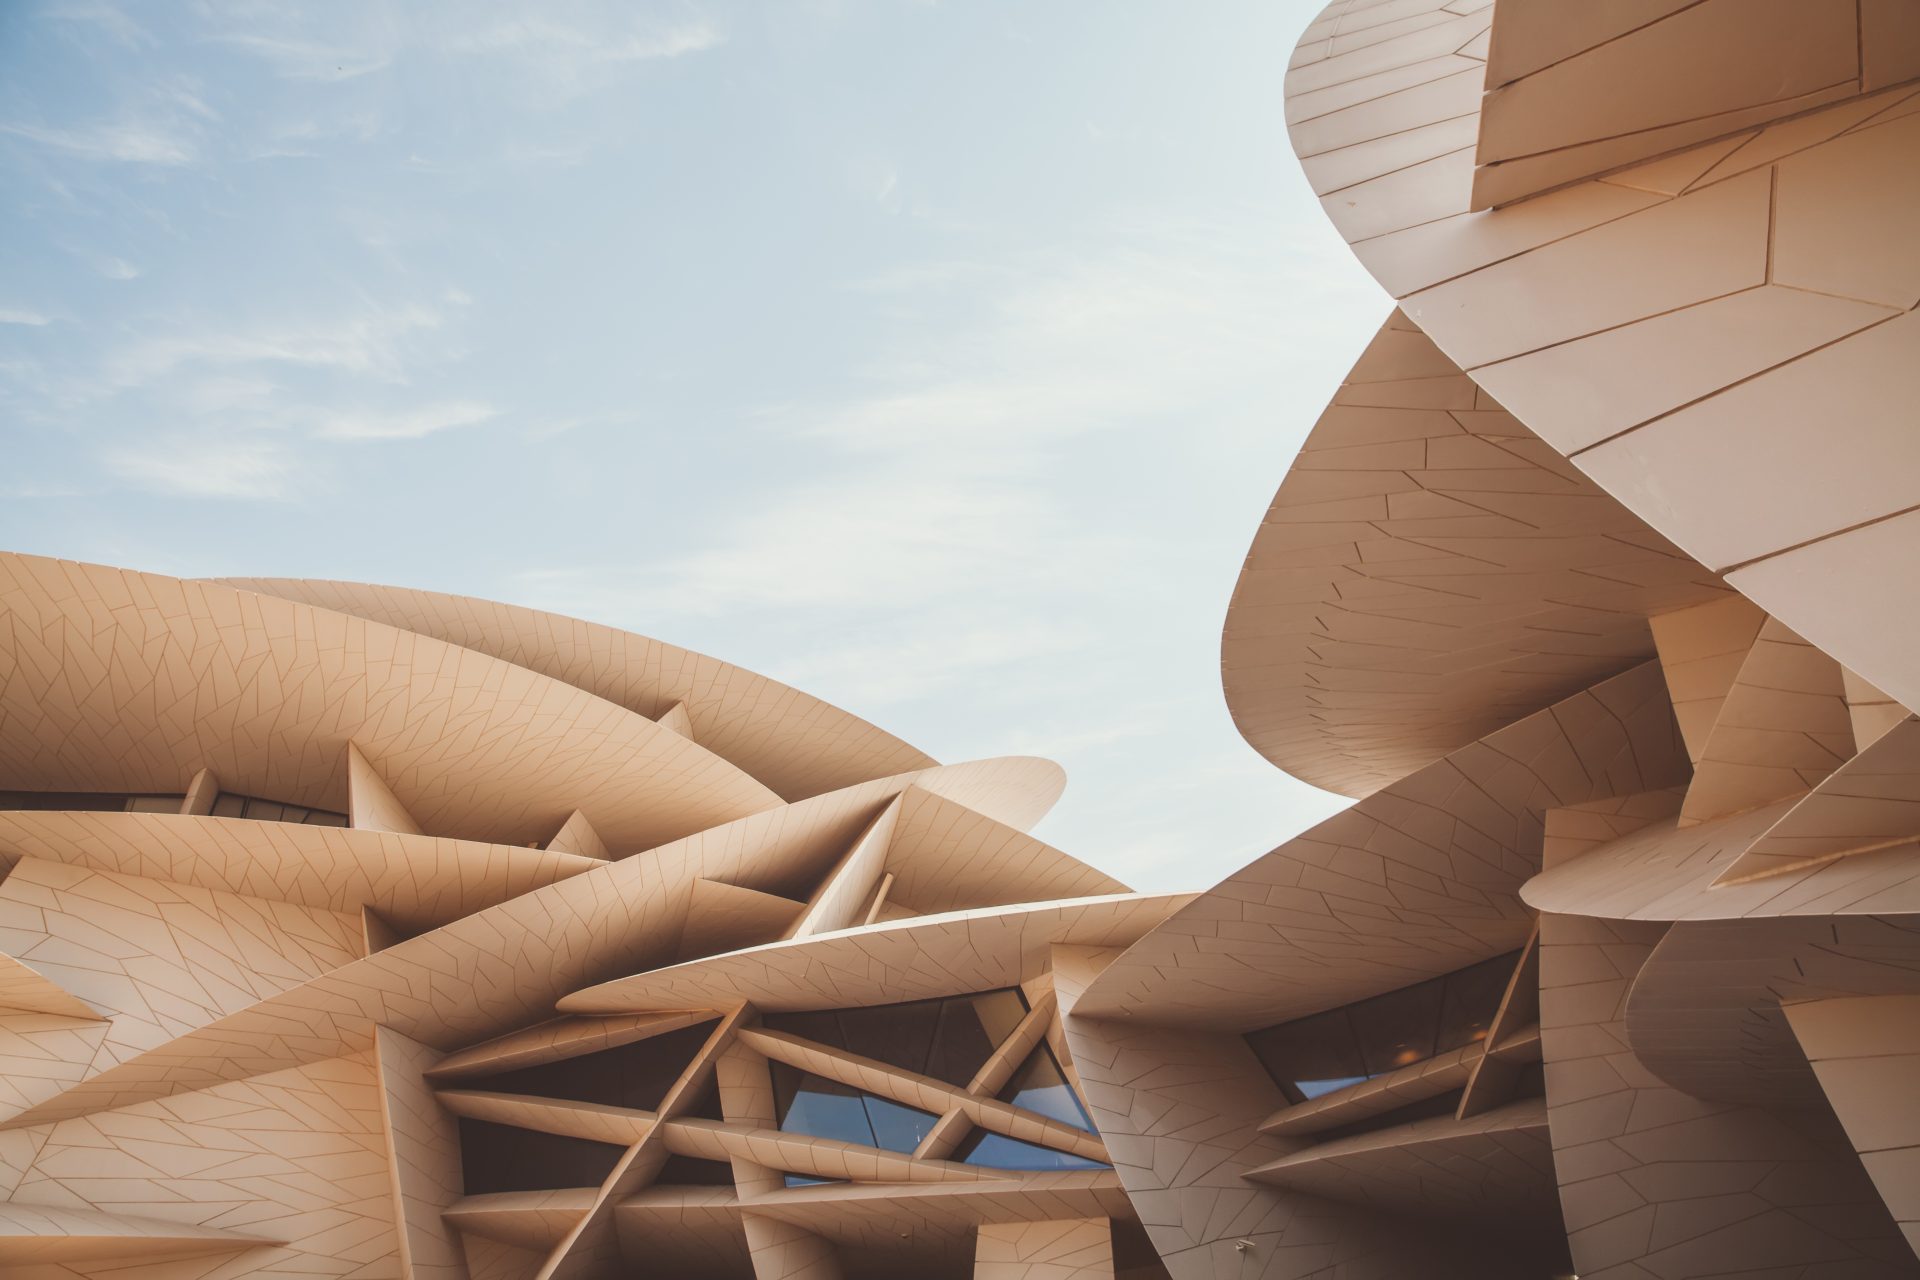 <p>In Qatar, there's a breathtaking National Museum worth visiting. It's clean, formed by elegant lines that evoke the simplicity and harmony of nature's “desert roses”. The mix of modern and traditional elements could reflect the dynamic relationship between human progress and the natural environment.</p>